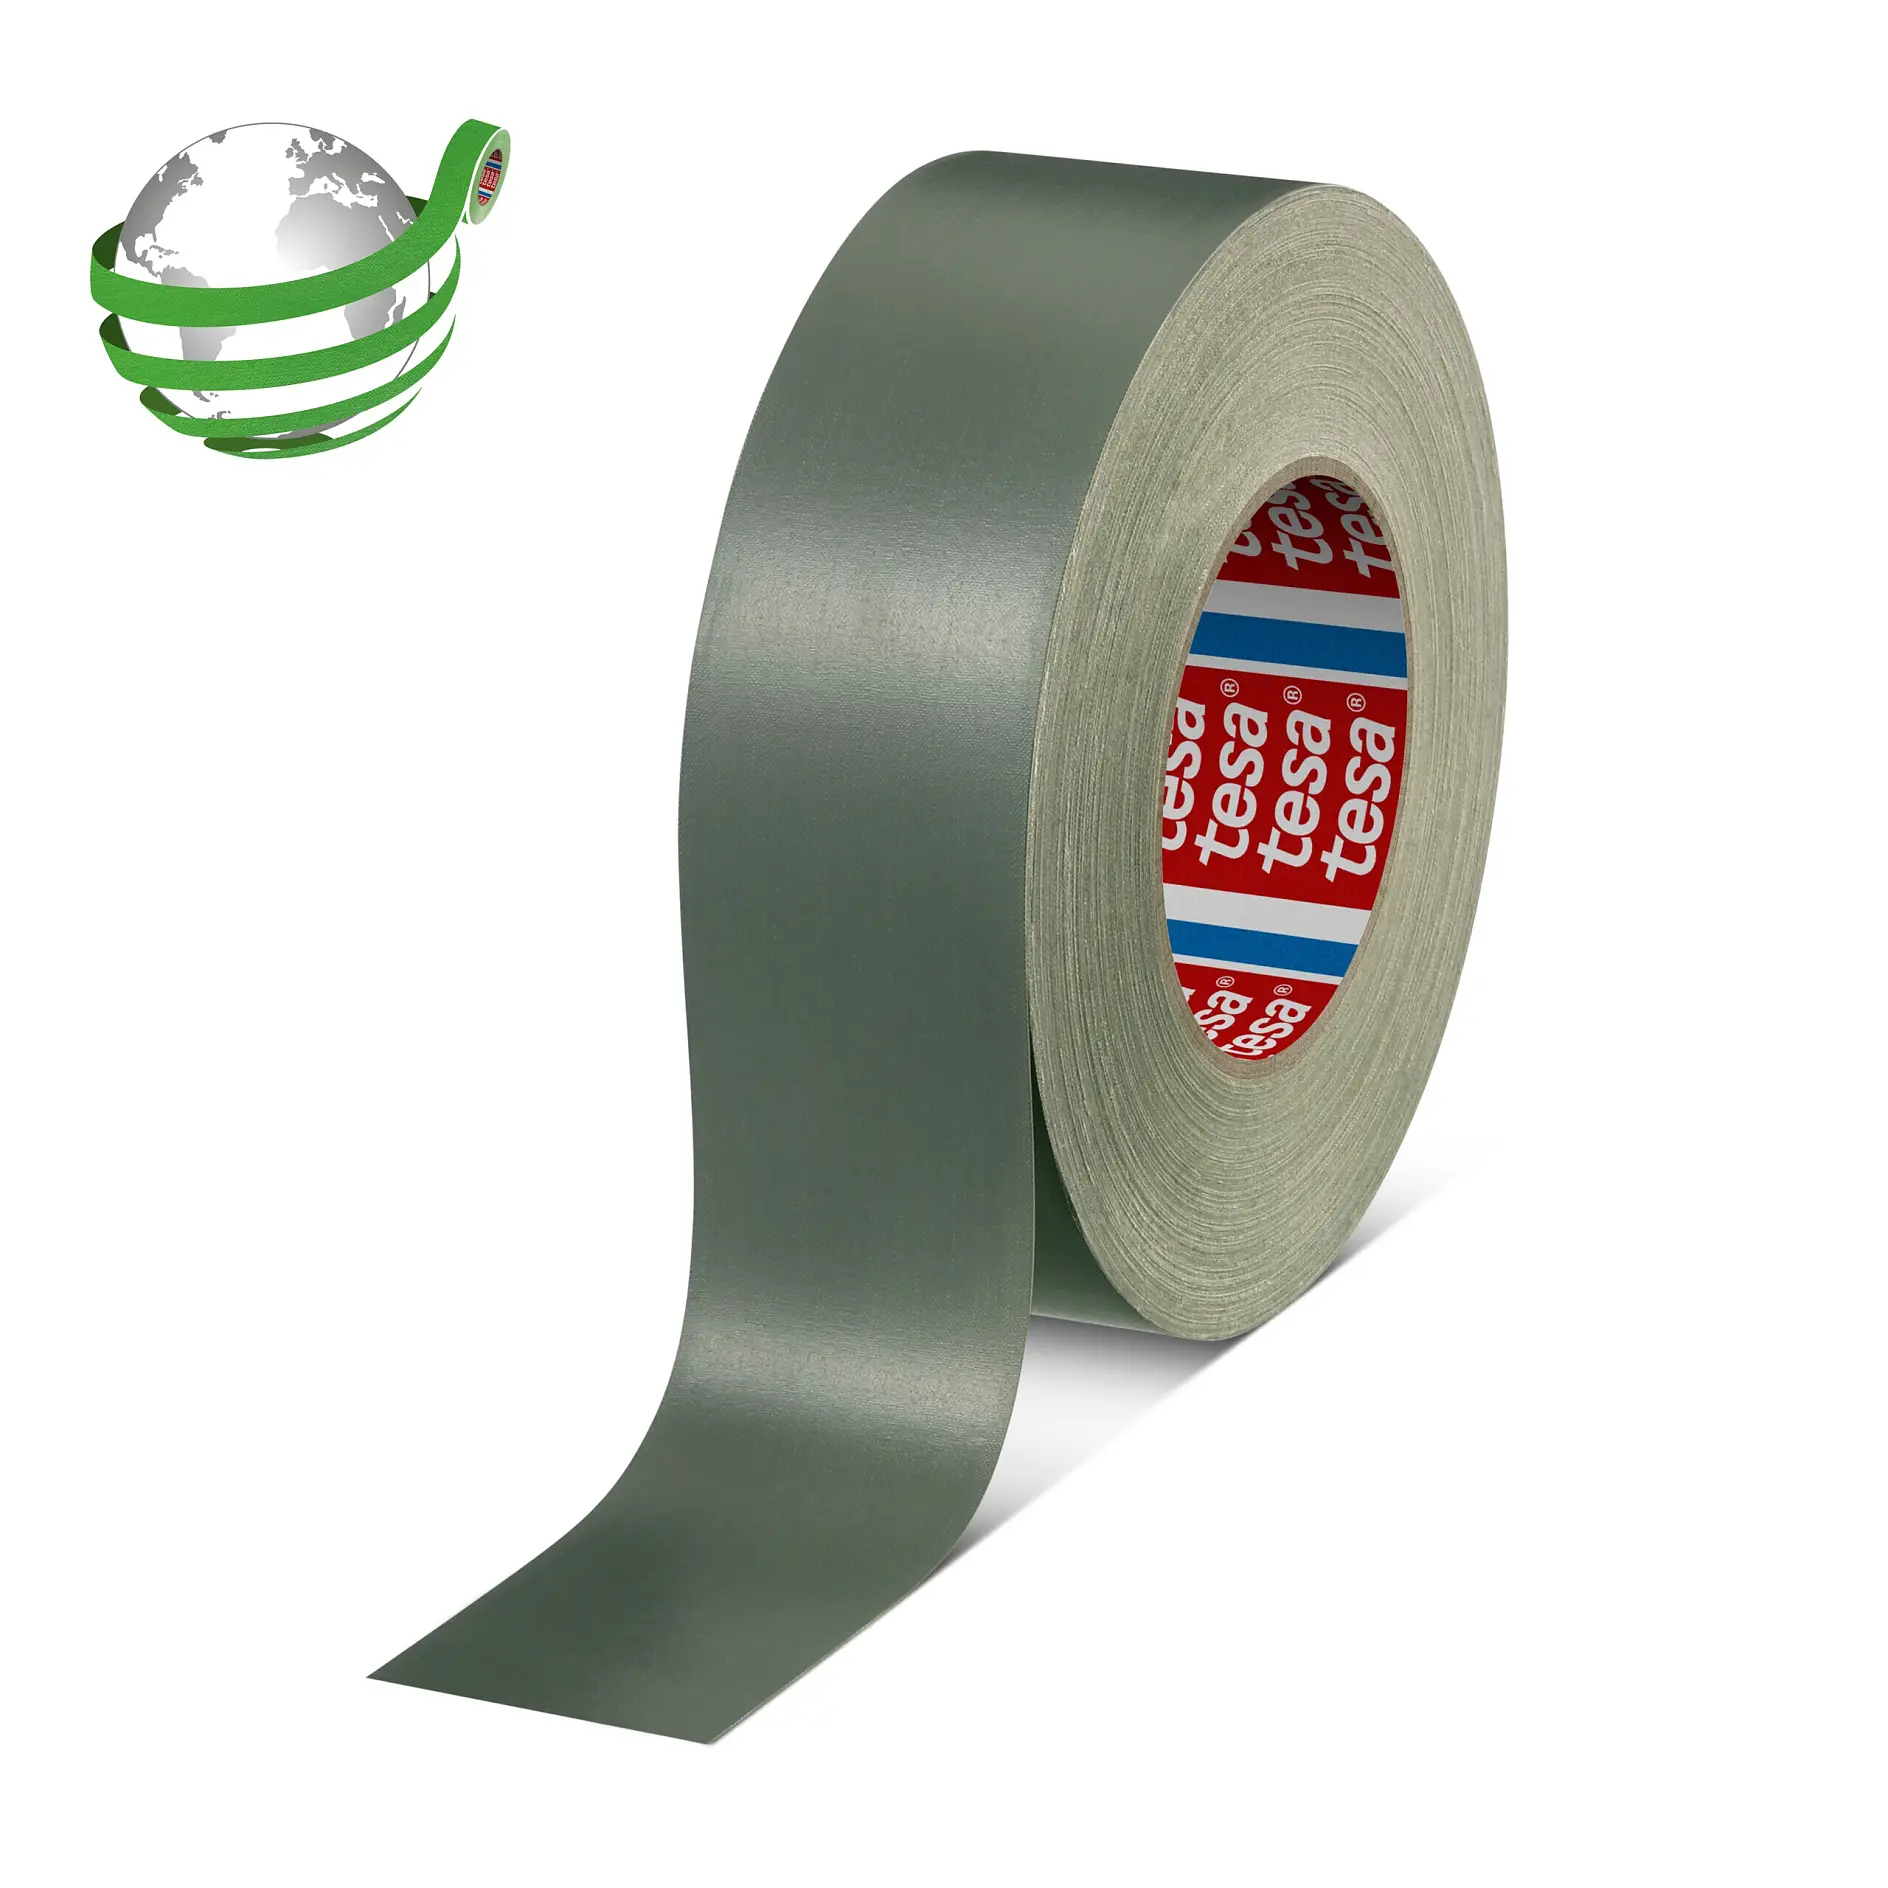 tesa-4657-pv1-temperature-resistant-acrylic-cloth-tape-gray-046570013101-pr-with-marker